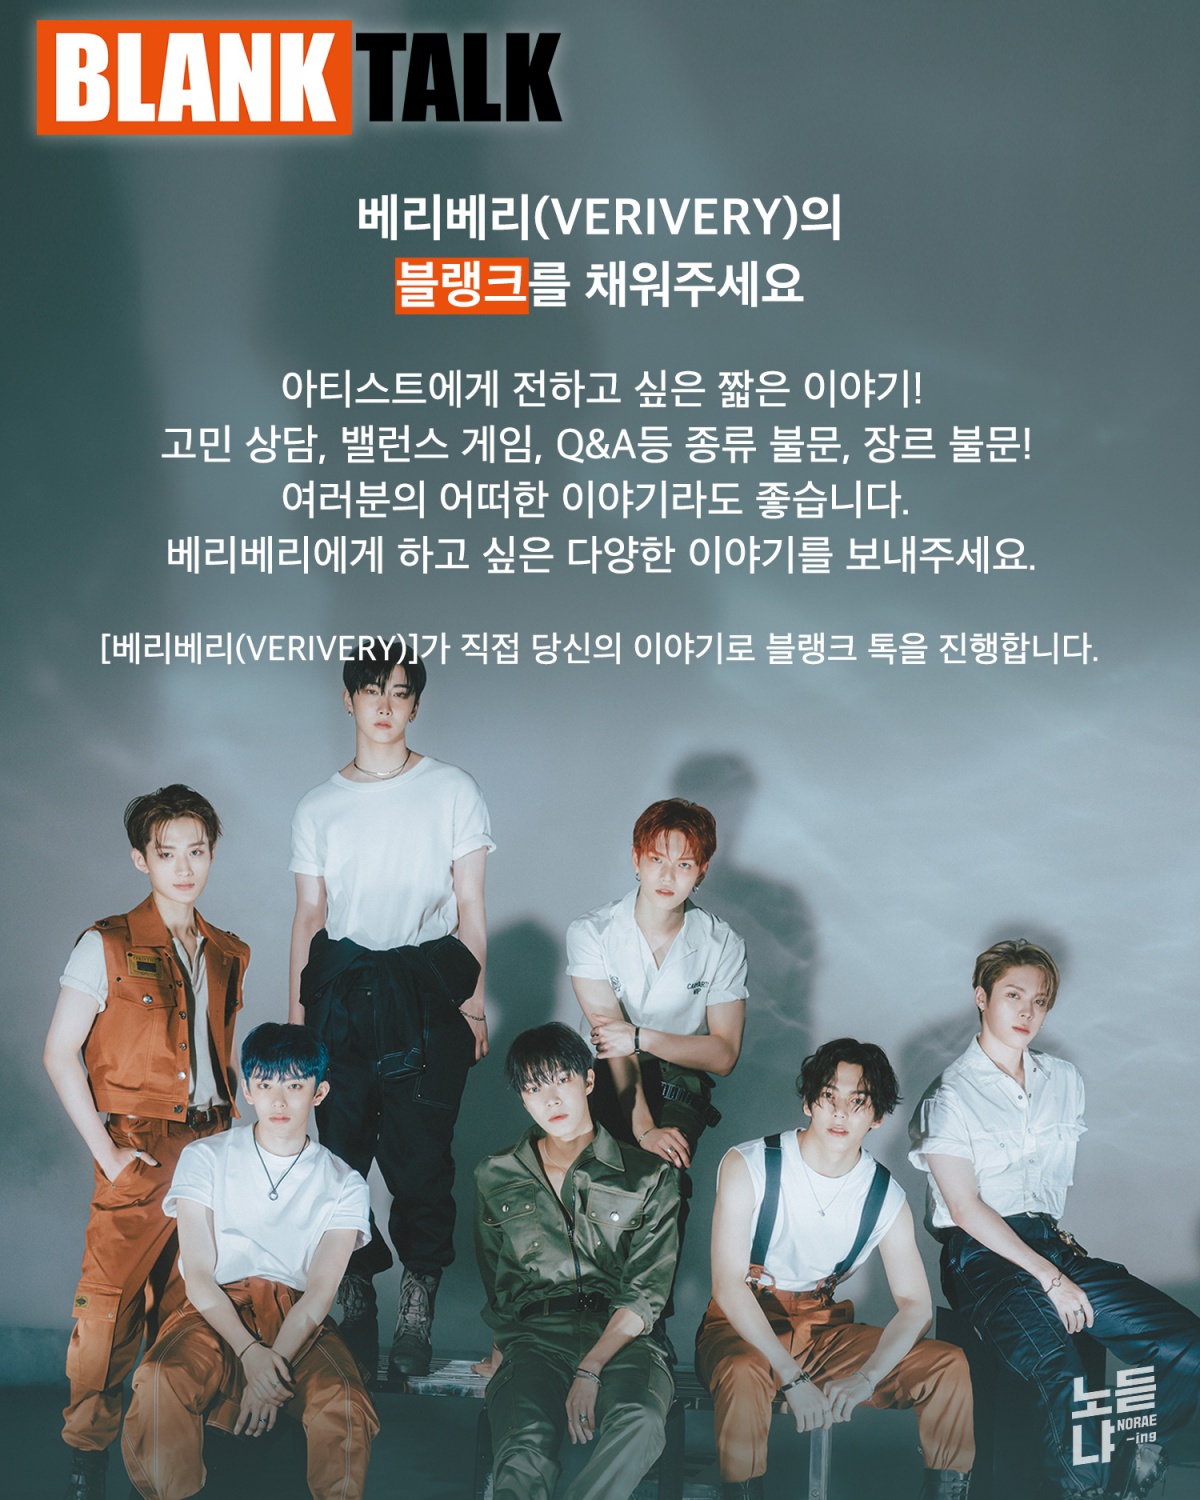 Verivery releases group photo ahead of comeback... narrow eyes